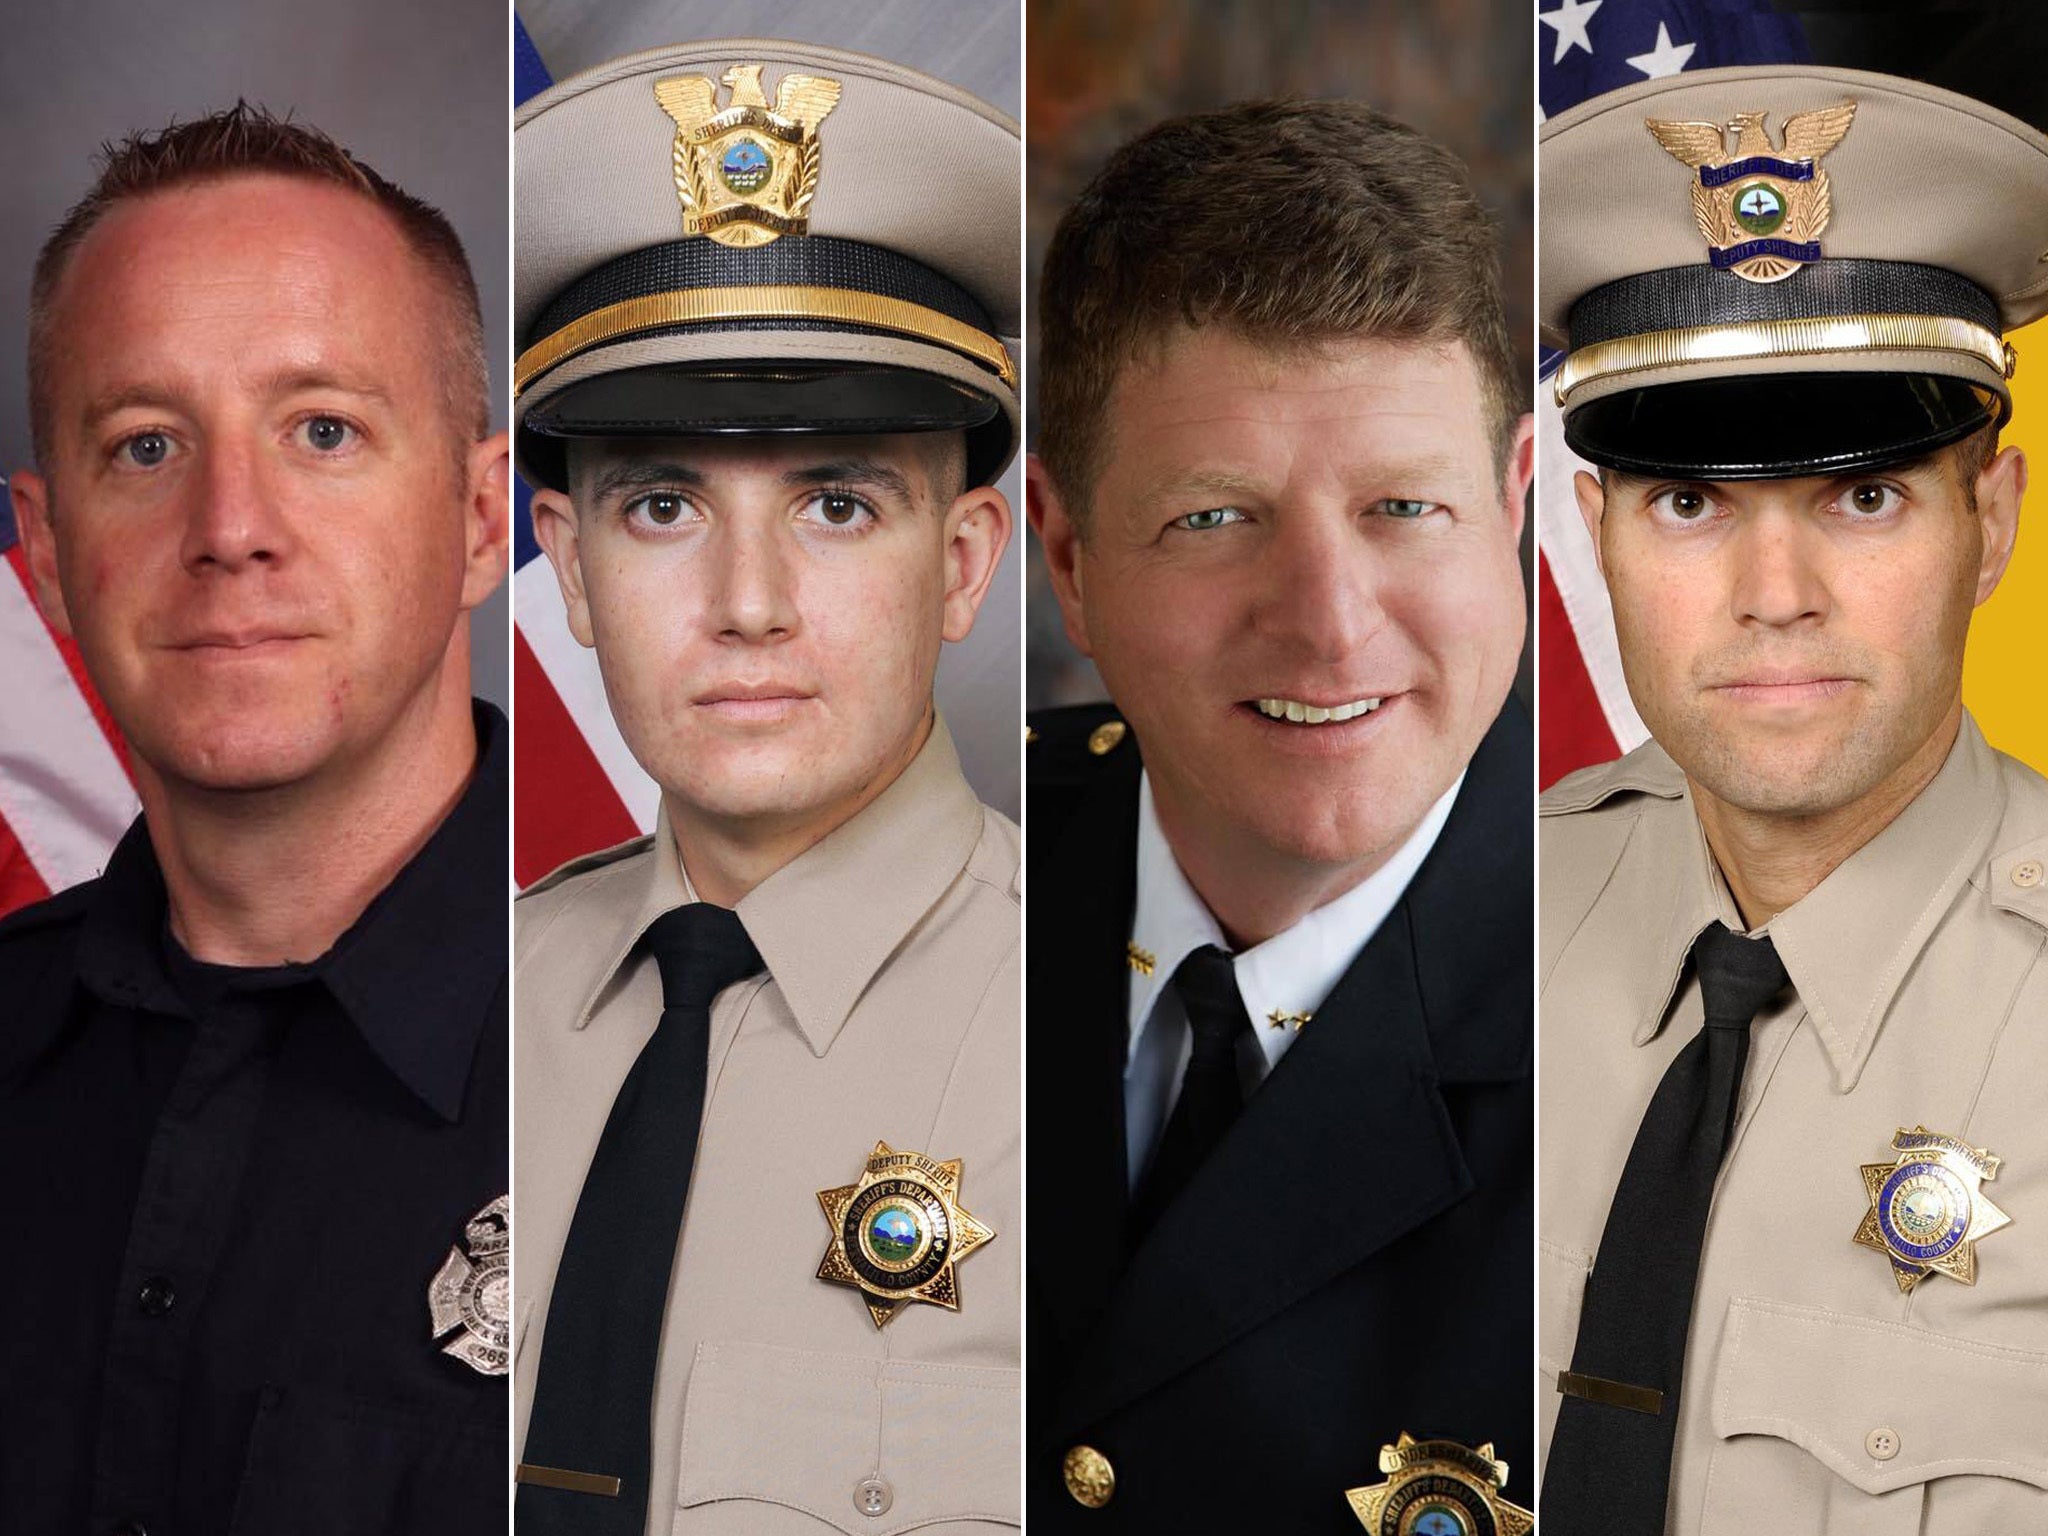 From left to right: Rescue Specialist Matthew King, Deputy Michael Levison, Undersheriff Larry Koren and Lt Fred Beers were all killed in a helicopter crash in New Mexico after assisting with putting out a wildfire in the Las Vegas area